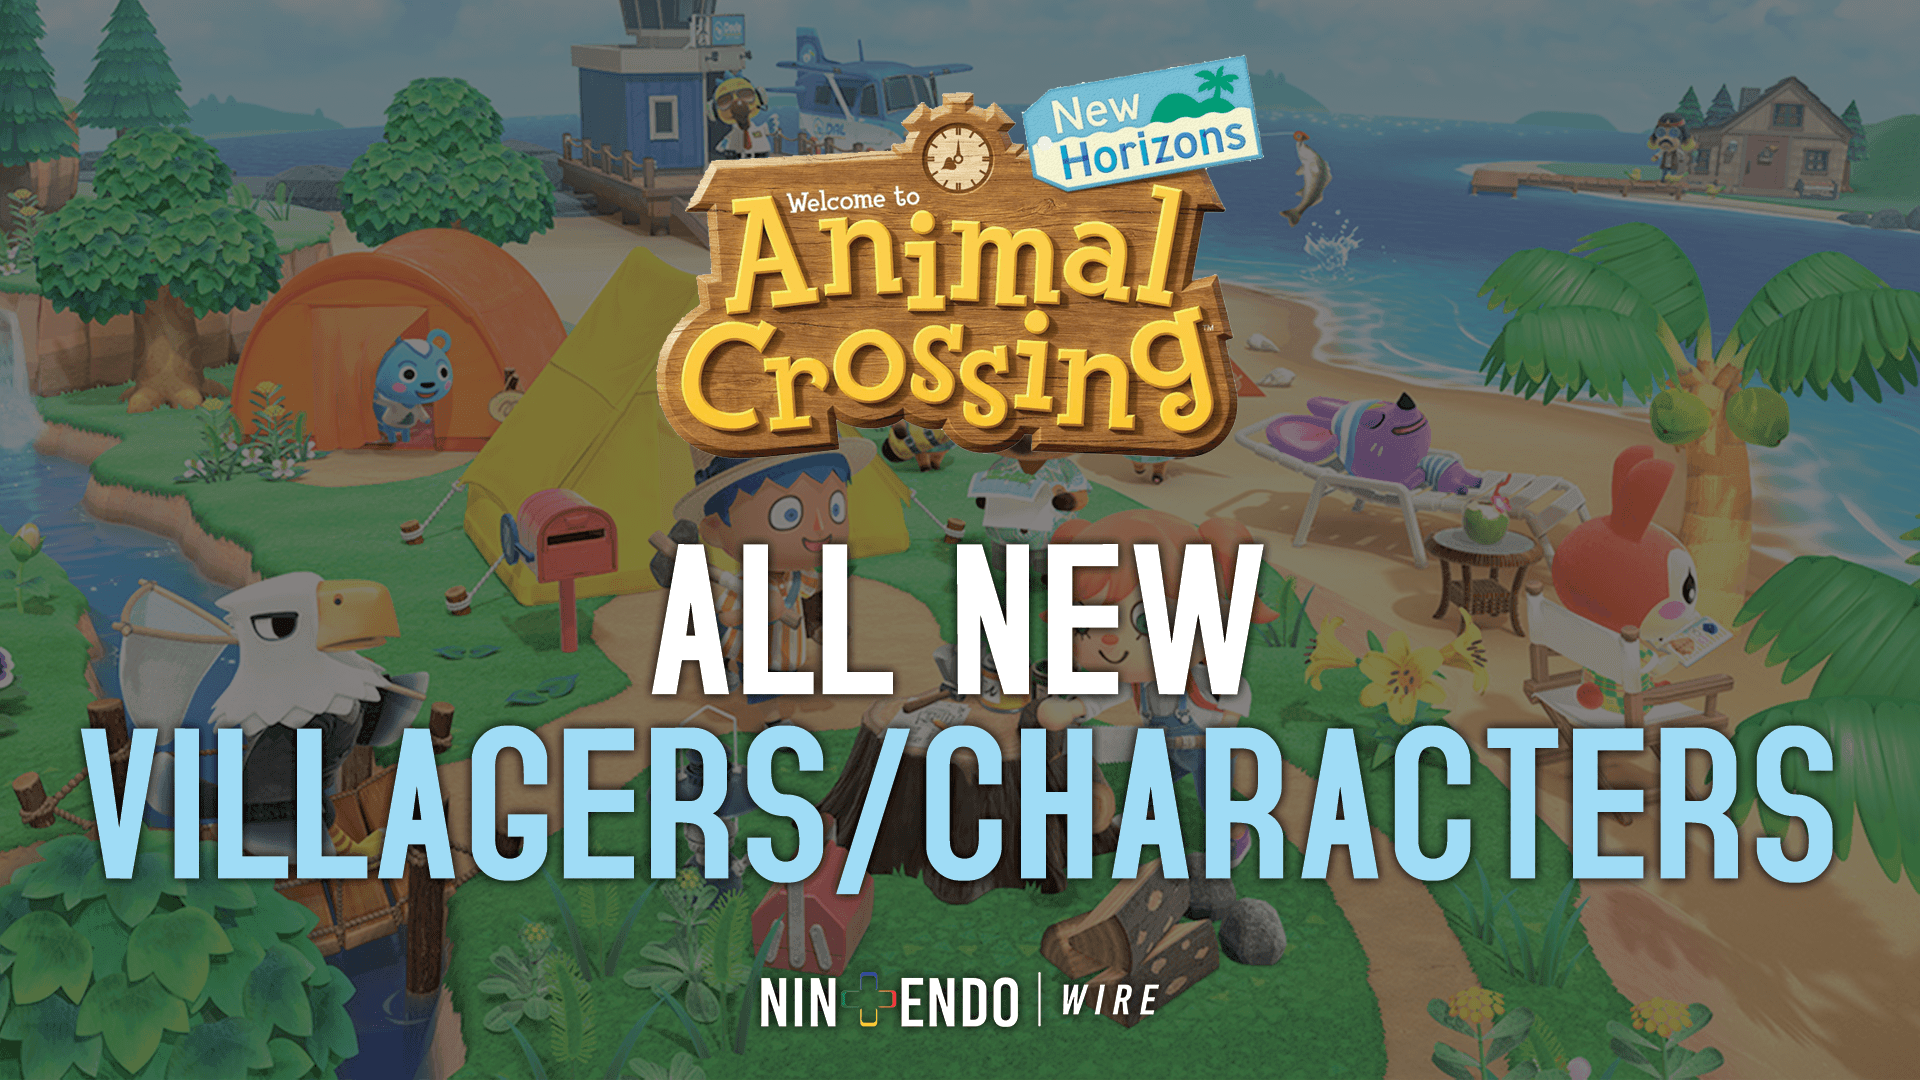 All New Villagers/Characters in Animal Crossing: New Horizons